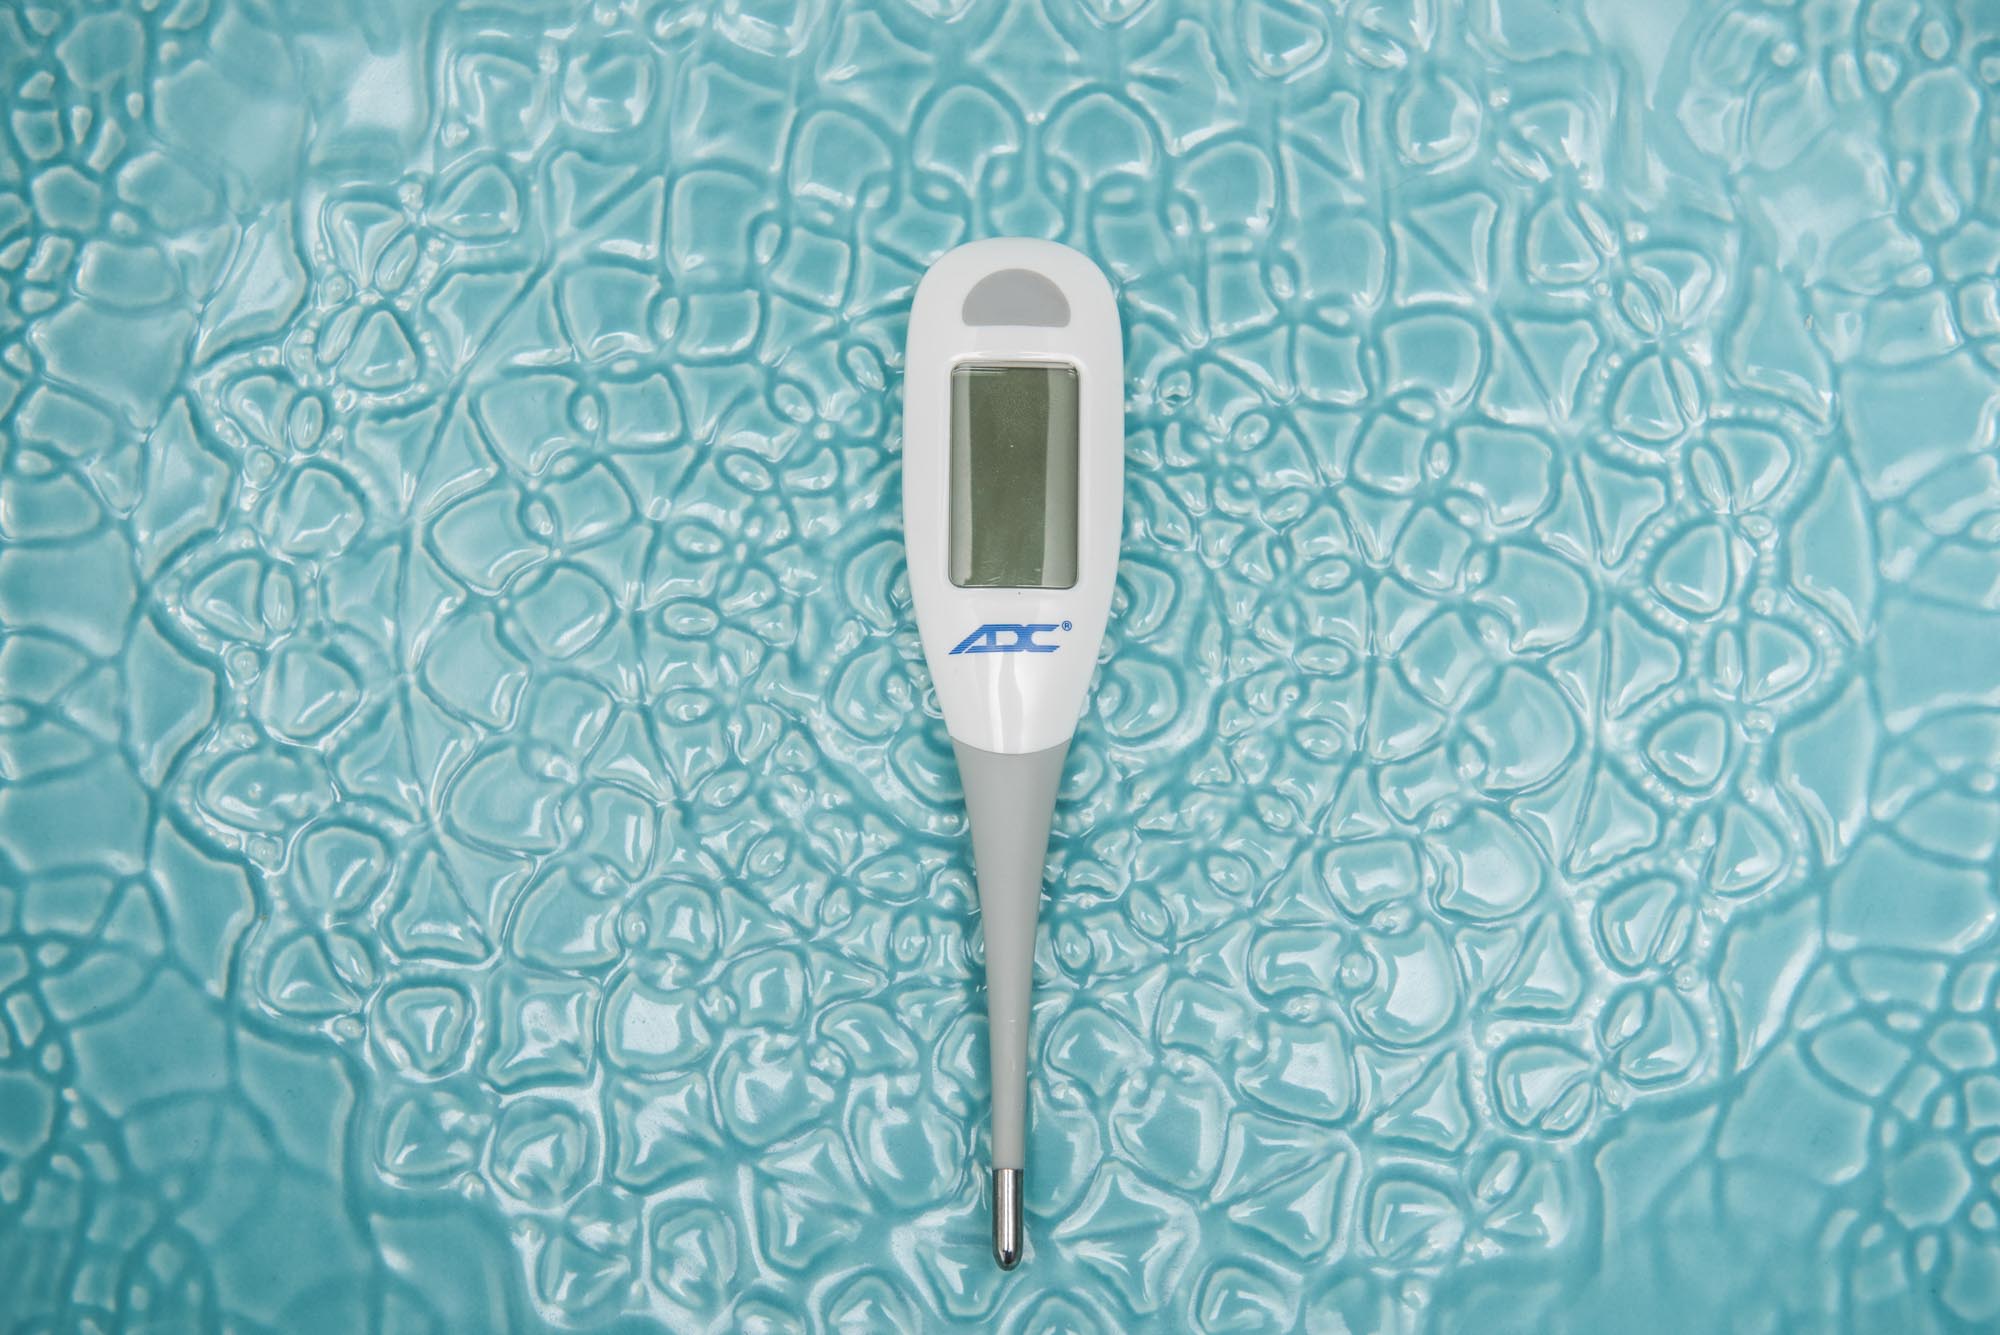 ADC probe thermometer